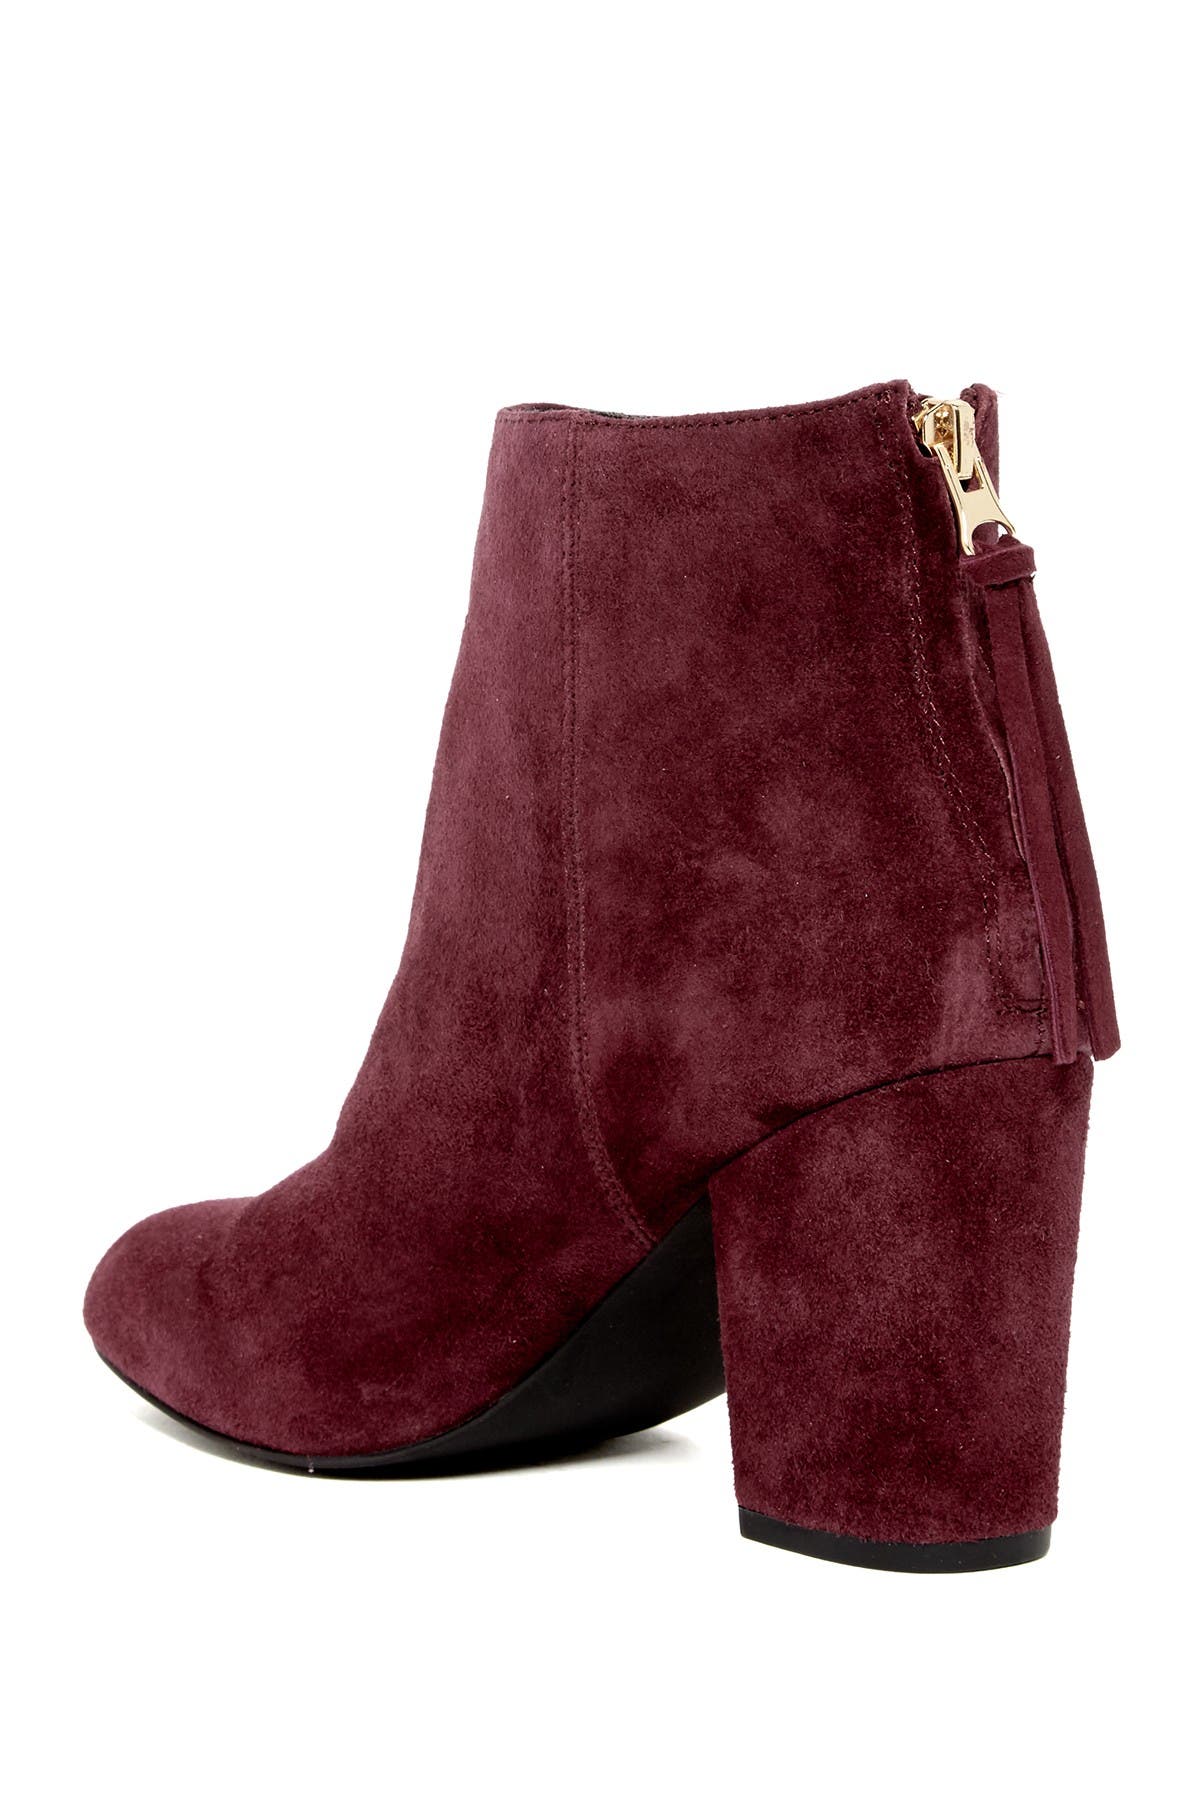 steve madden cynthia ankle bootie